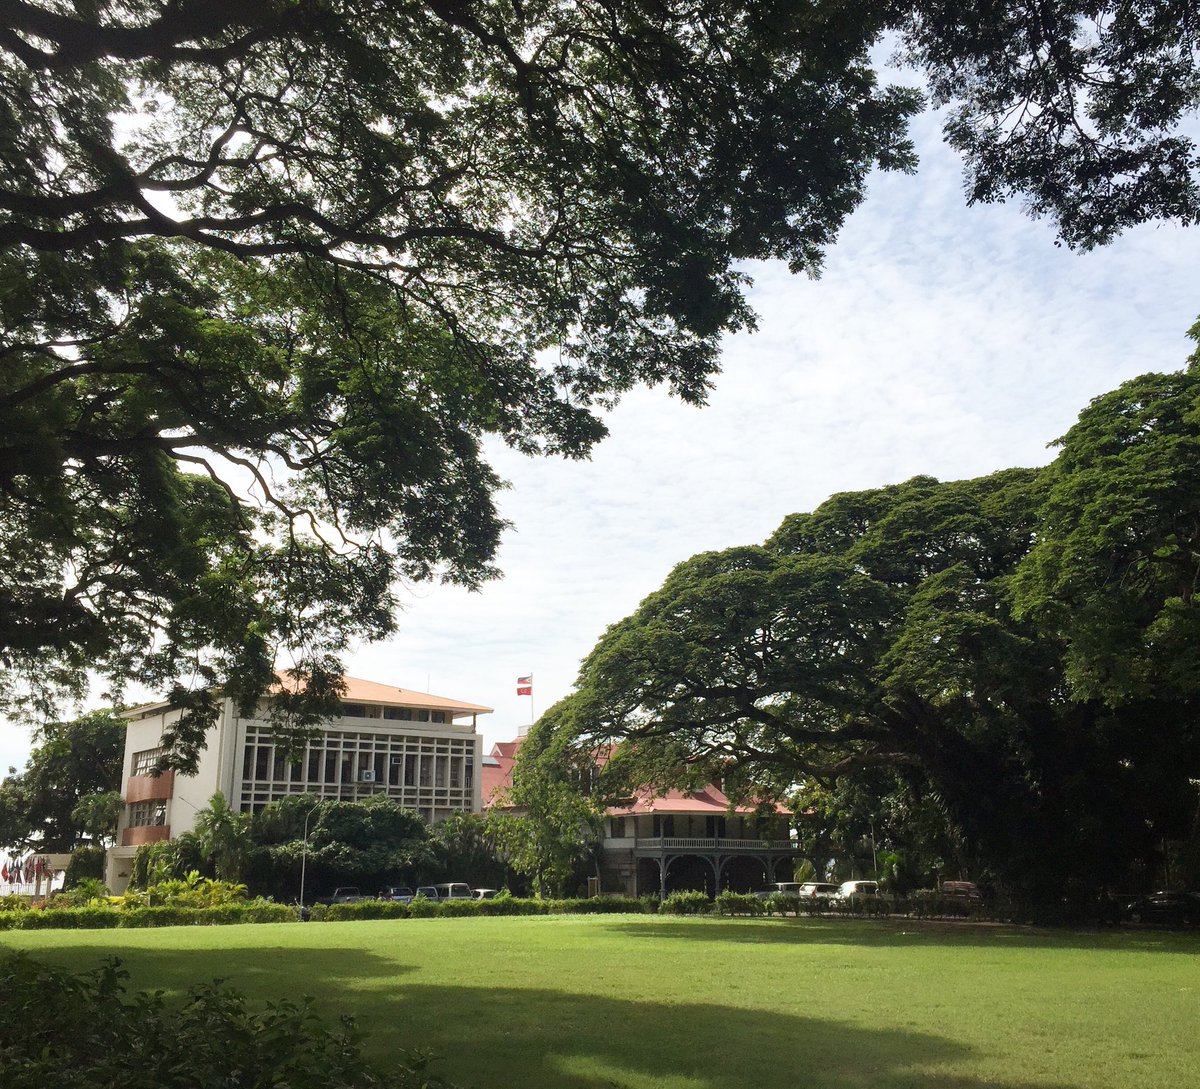 Hello again, beautiful Silliman University! Here for #ClimateActionPH #GreenConvergence